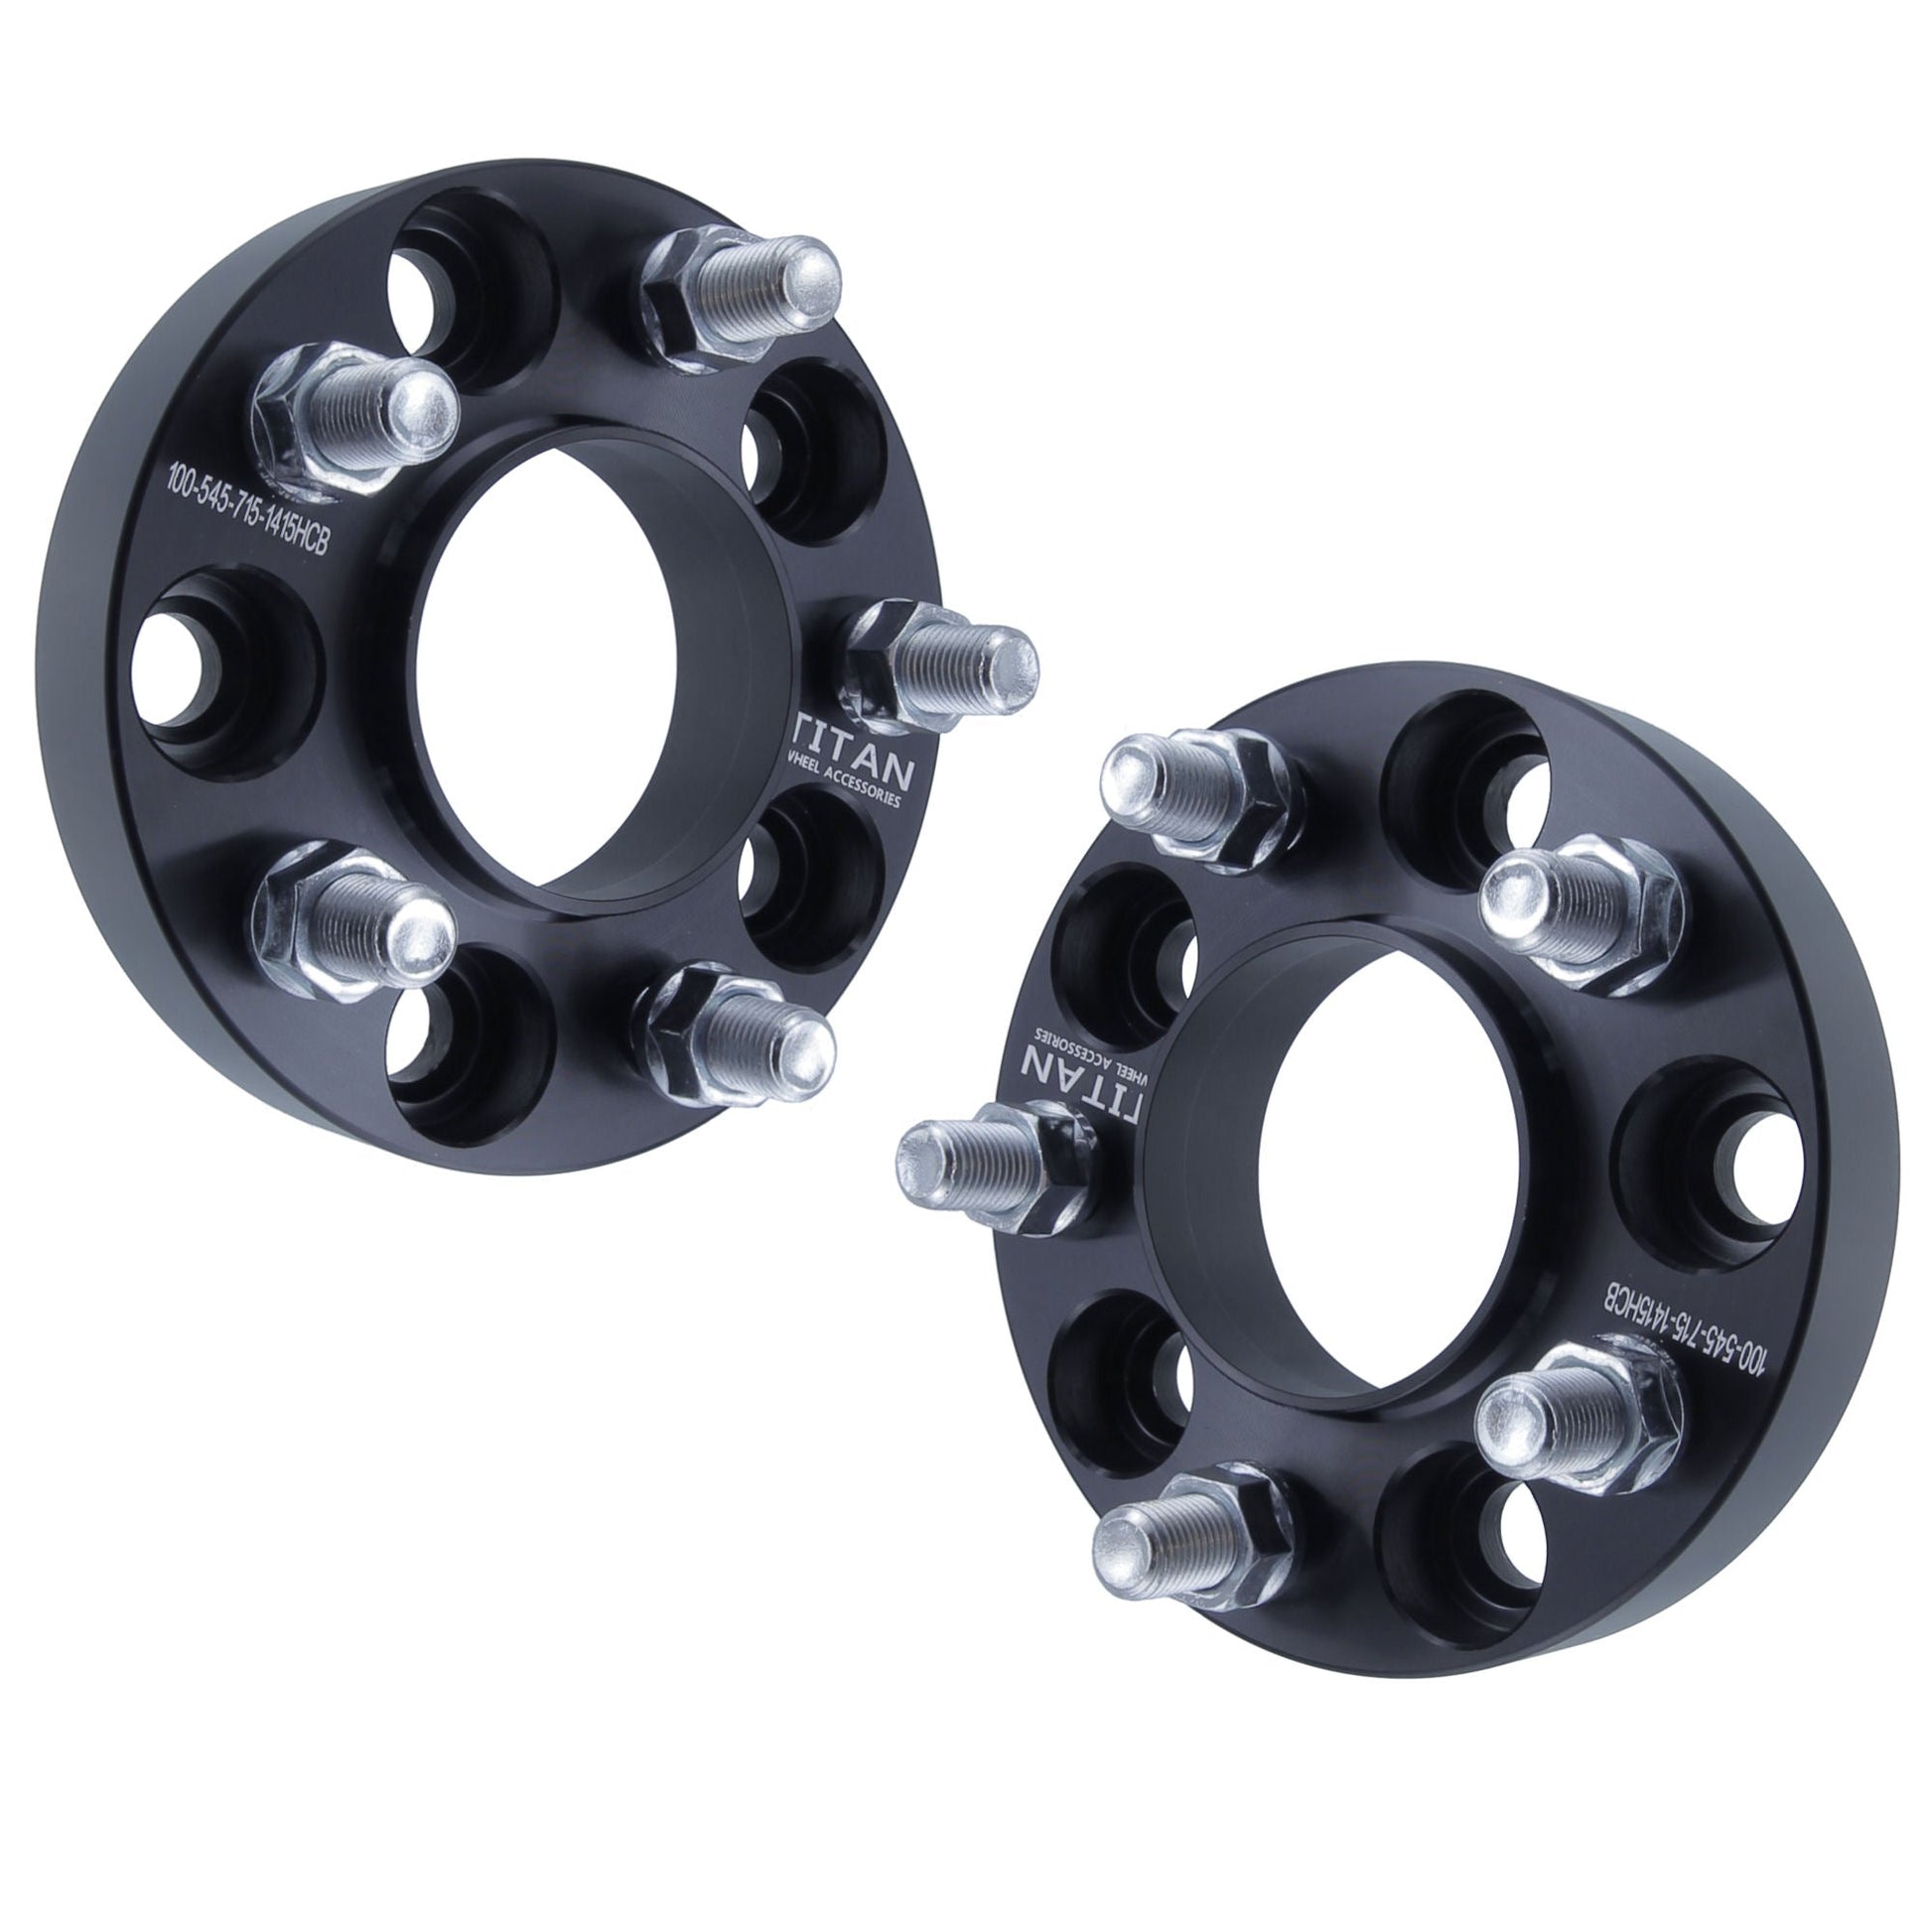 1.5" Titan Wheel Spacers for Dodge Charger Challenger Chrysler 300 | 5x4.5 | 71.5 Hubcentric | 14x1.5 Studs | Set of 4 | Titan Wheel Accessories